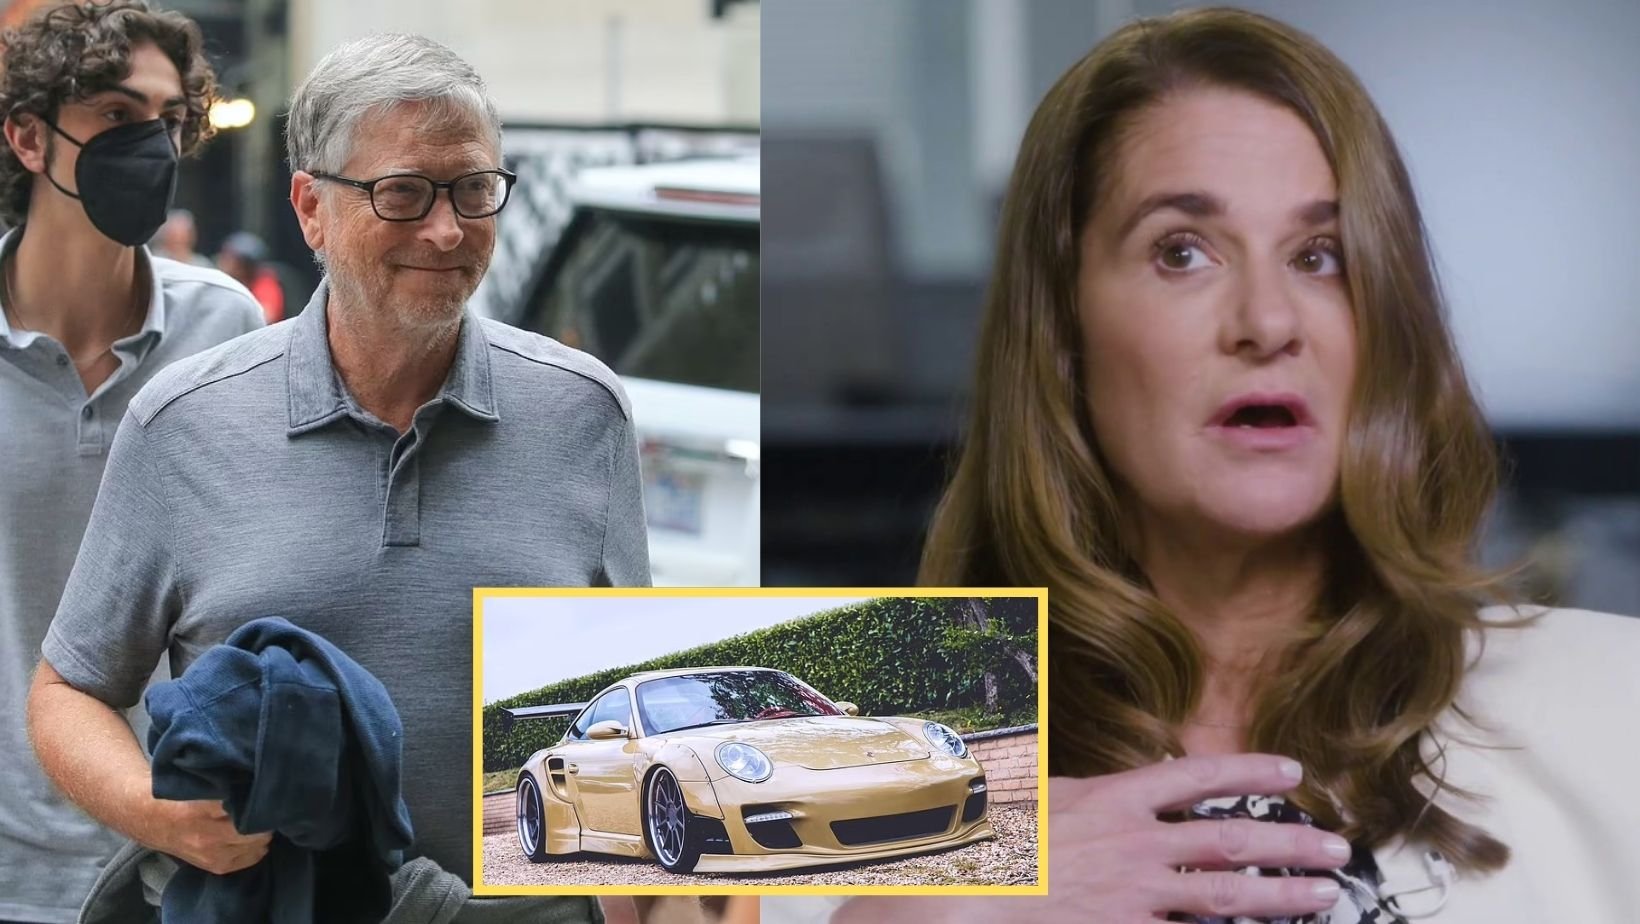 cover 1.jpg?resize=412,232 - Bill Gates Mysteriously Disappears At Work In A Golden Brown Porsche To Meet Women, Report Claims